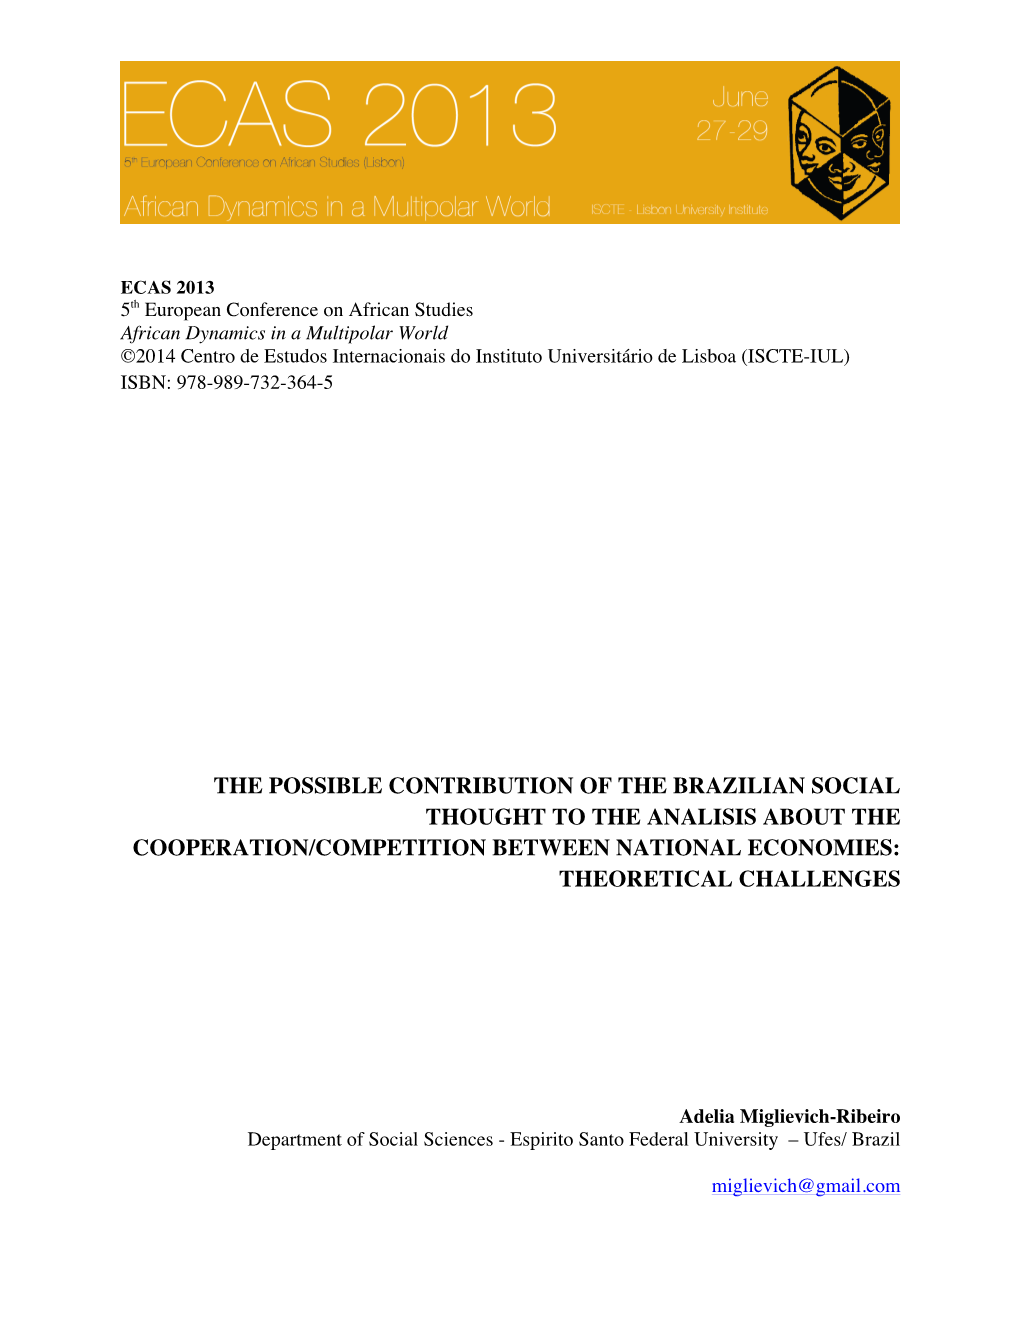 The Possible Contribution of the Brazilian Social Thought to the Analisis About the Cooperation/Competition Between National Economies: Theoretical Challenges